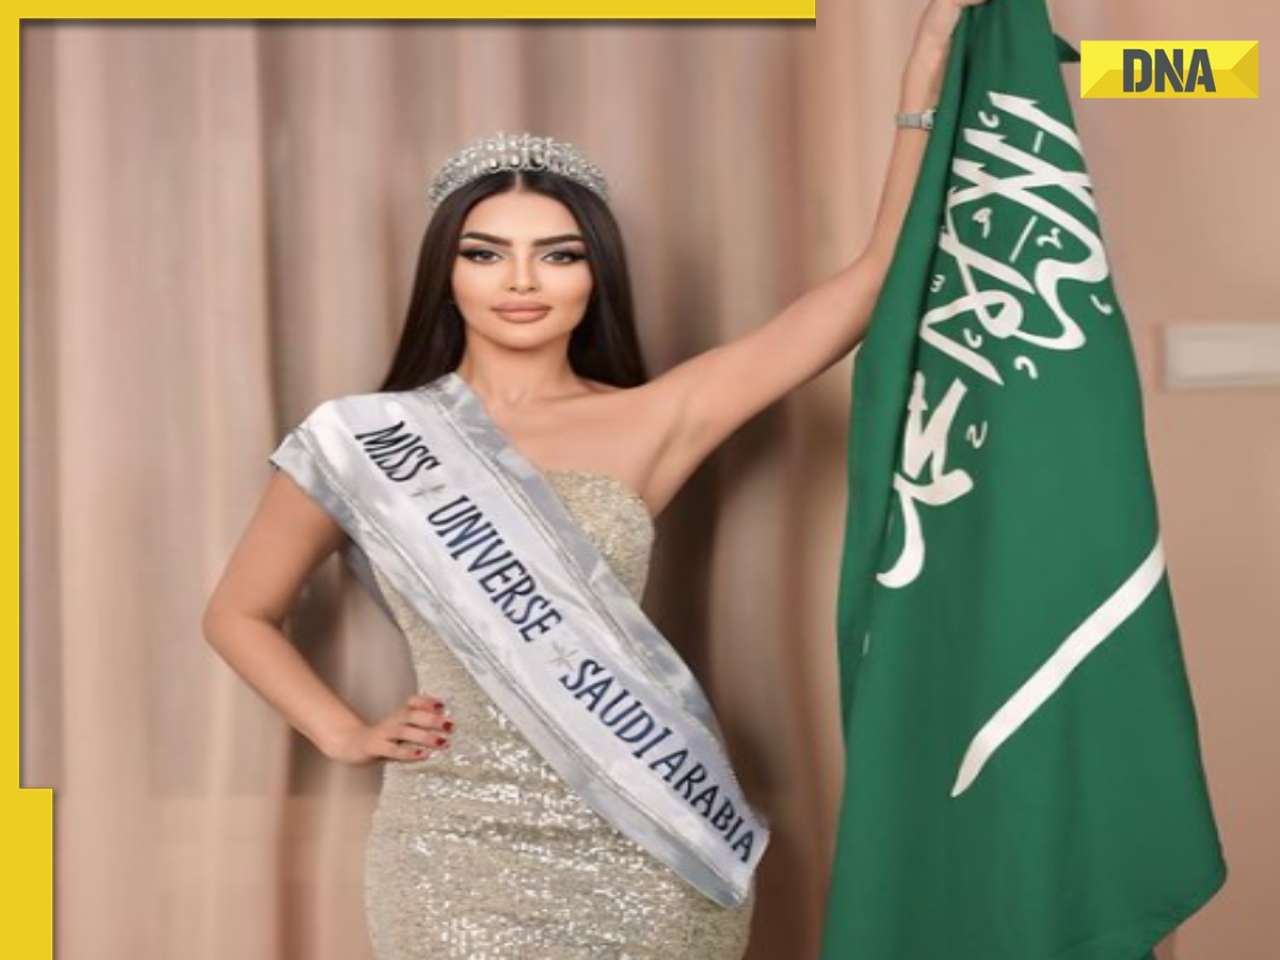 Meet Rumy Alqahtani, first Miss Universe contestant from Saudi Arabia, know all about her